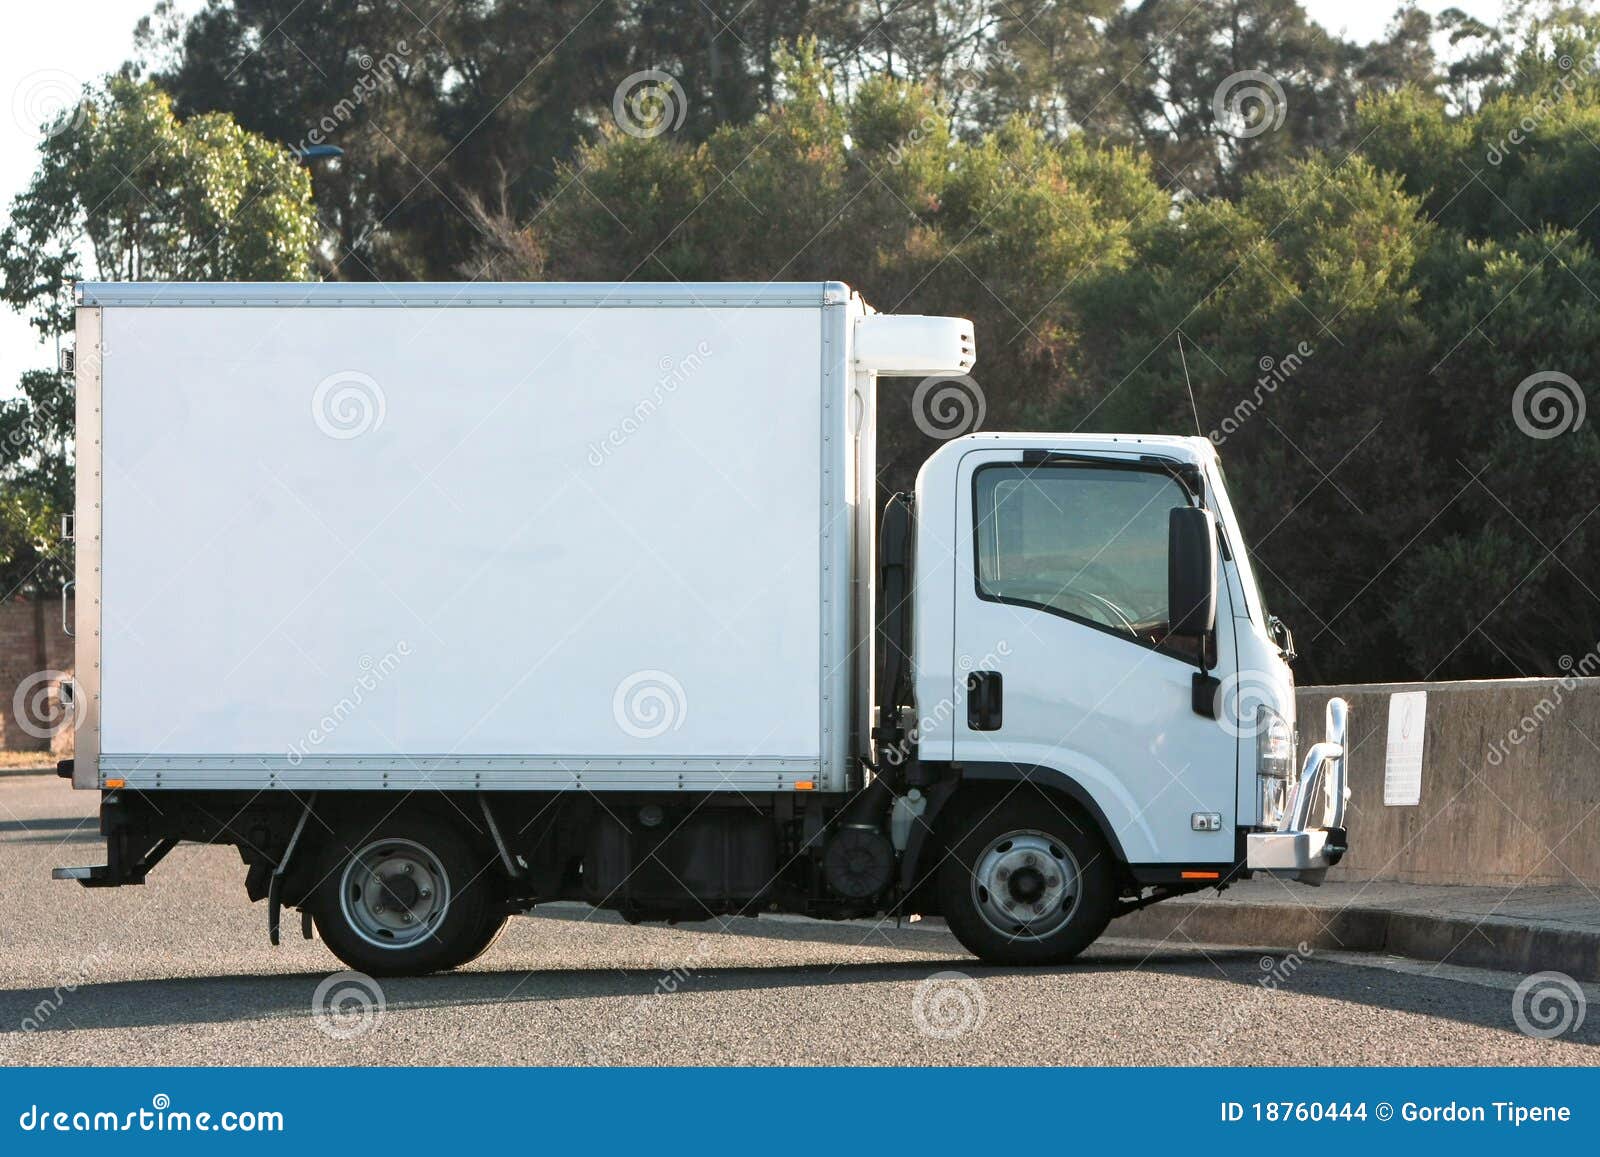  Small  Light Truck  With Refrigerated Container  Stock Photo 